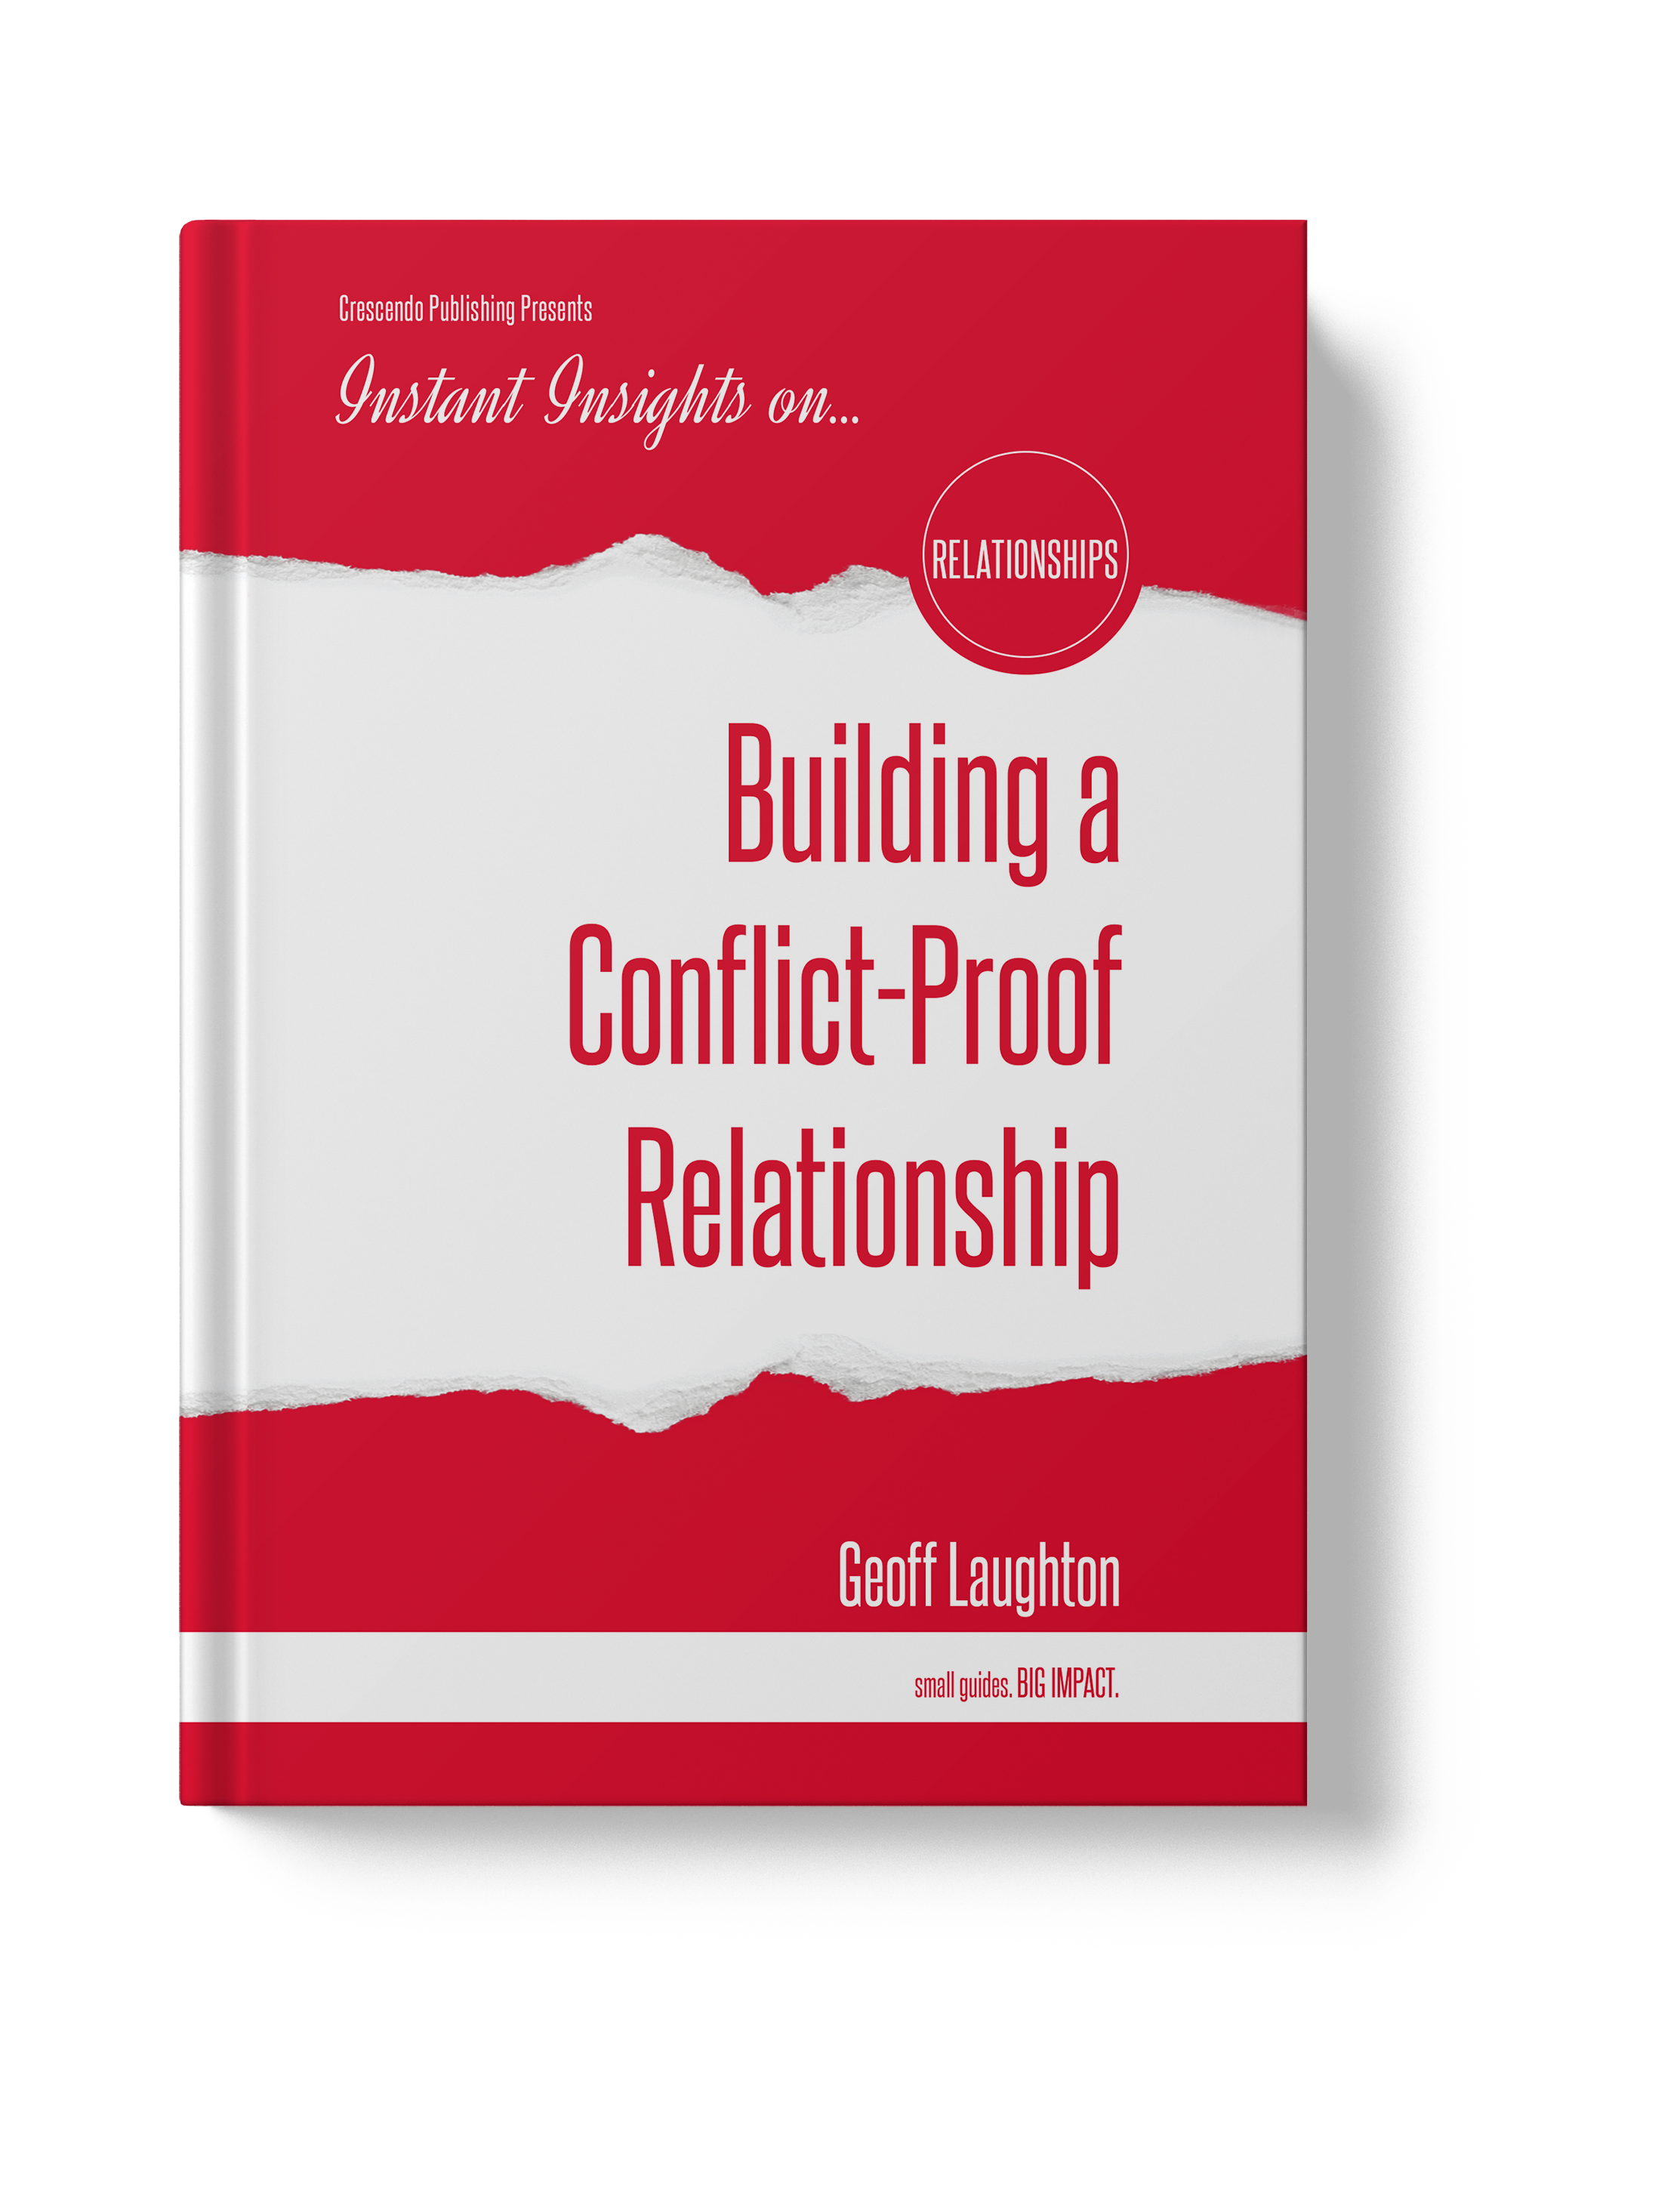 Building a Conflict-Proof Relationship